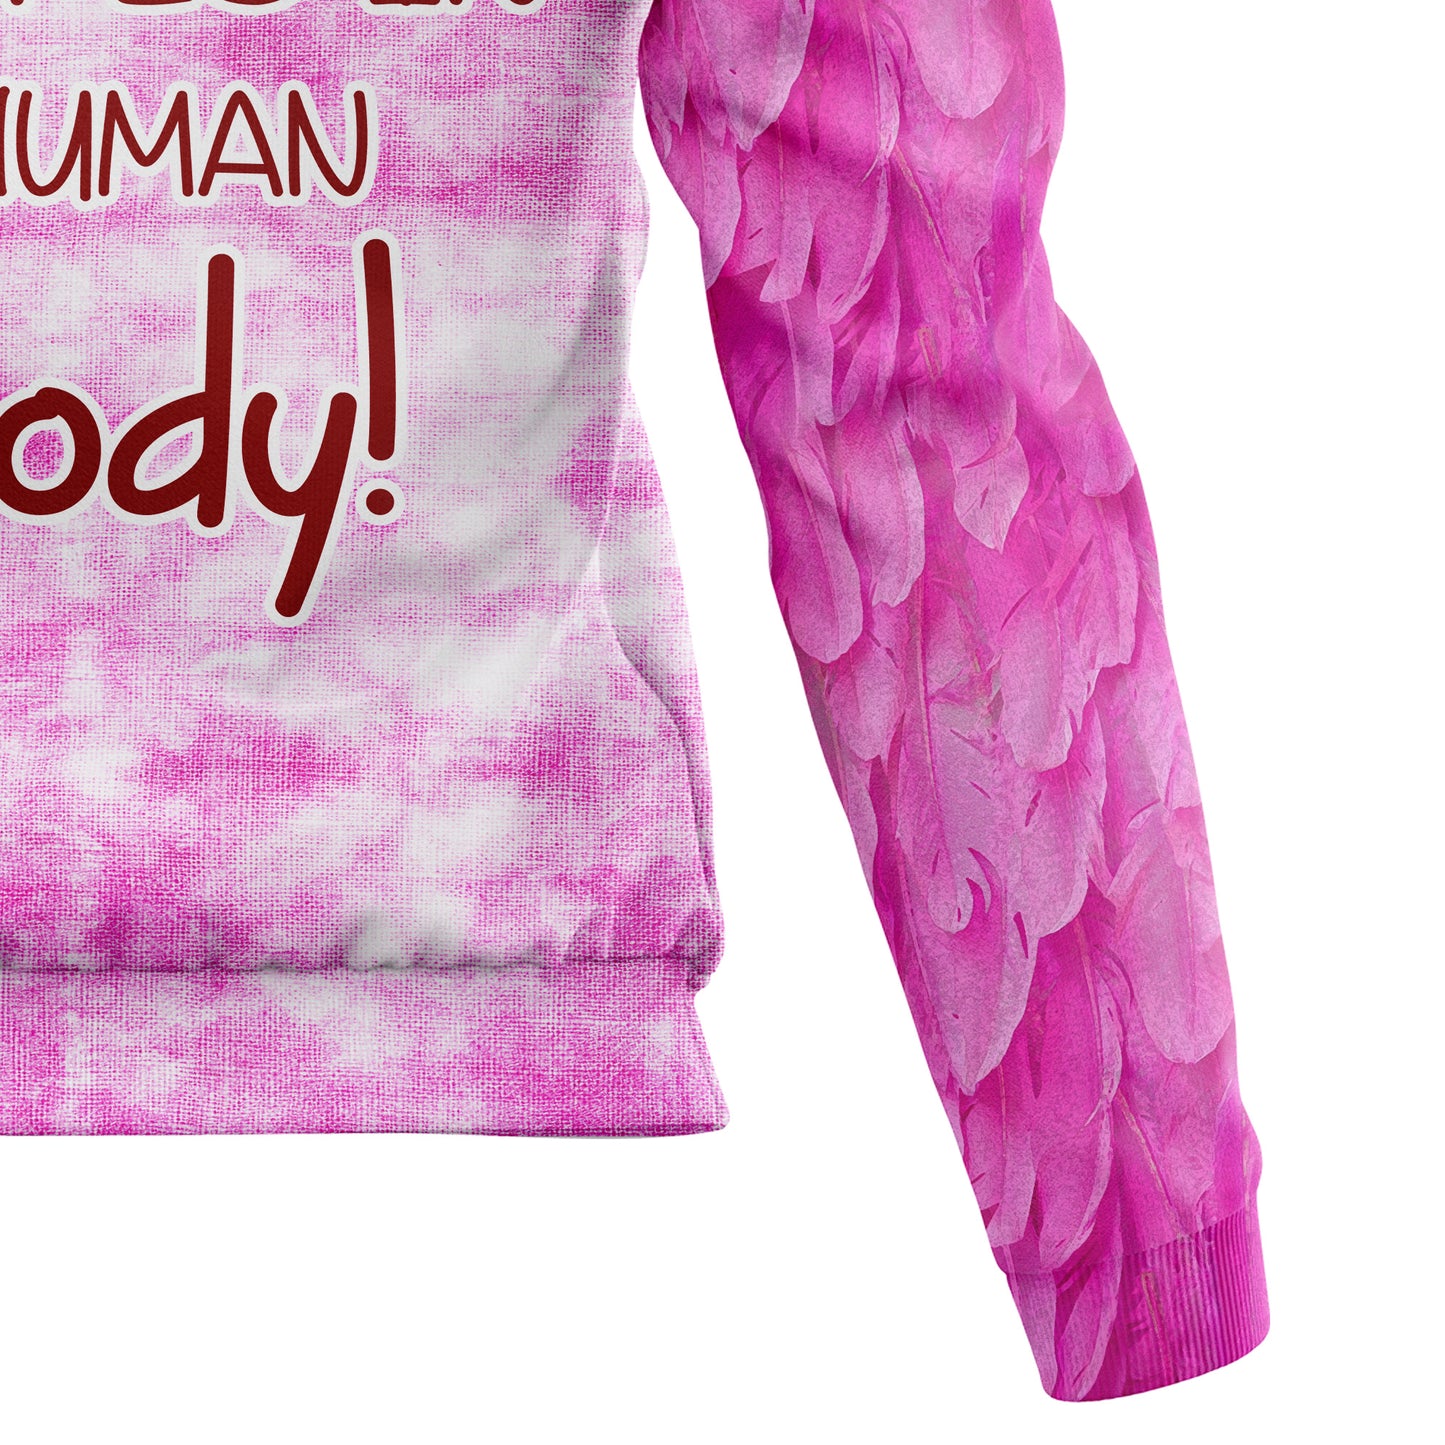 Flamingo Trapped In Human Body TY2011 All Over Print Unisex Hoodie